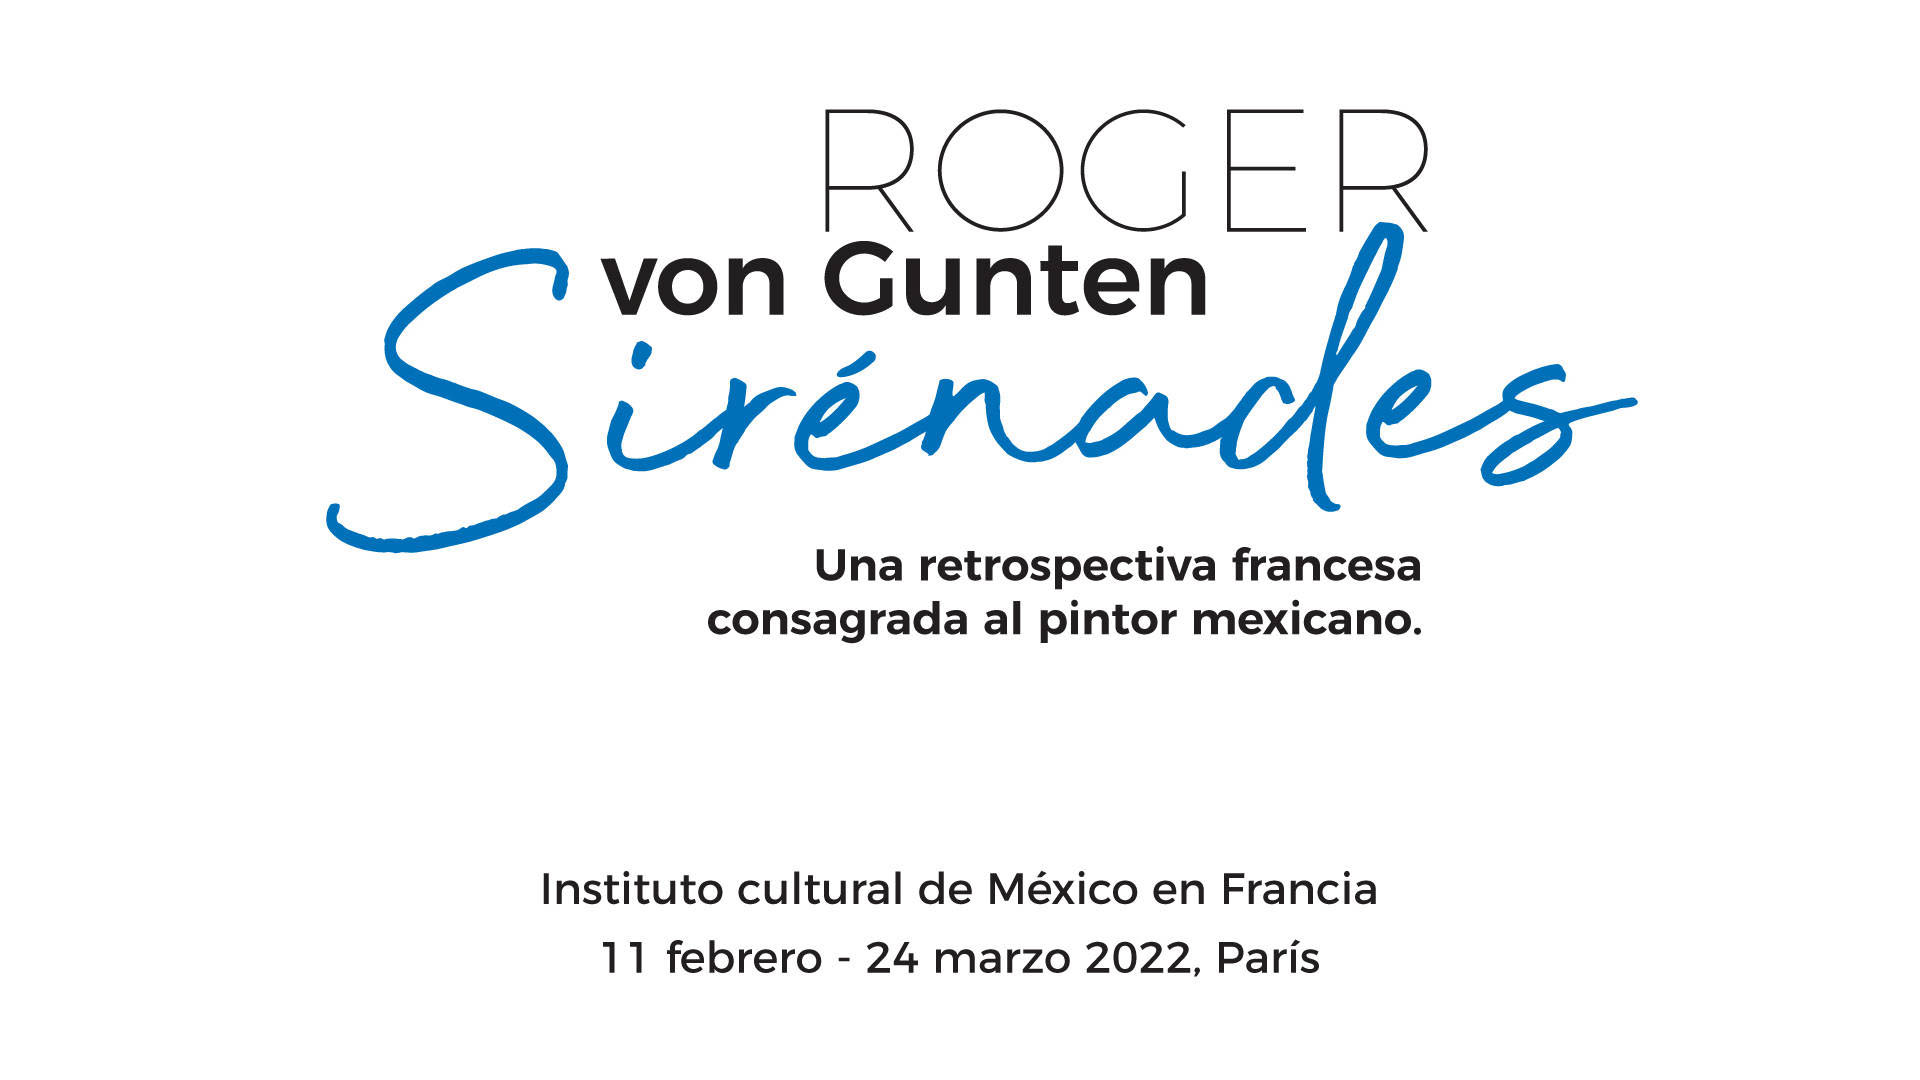 Sirénades at the Cultural Institute of Mexico in France